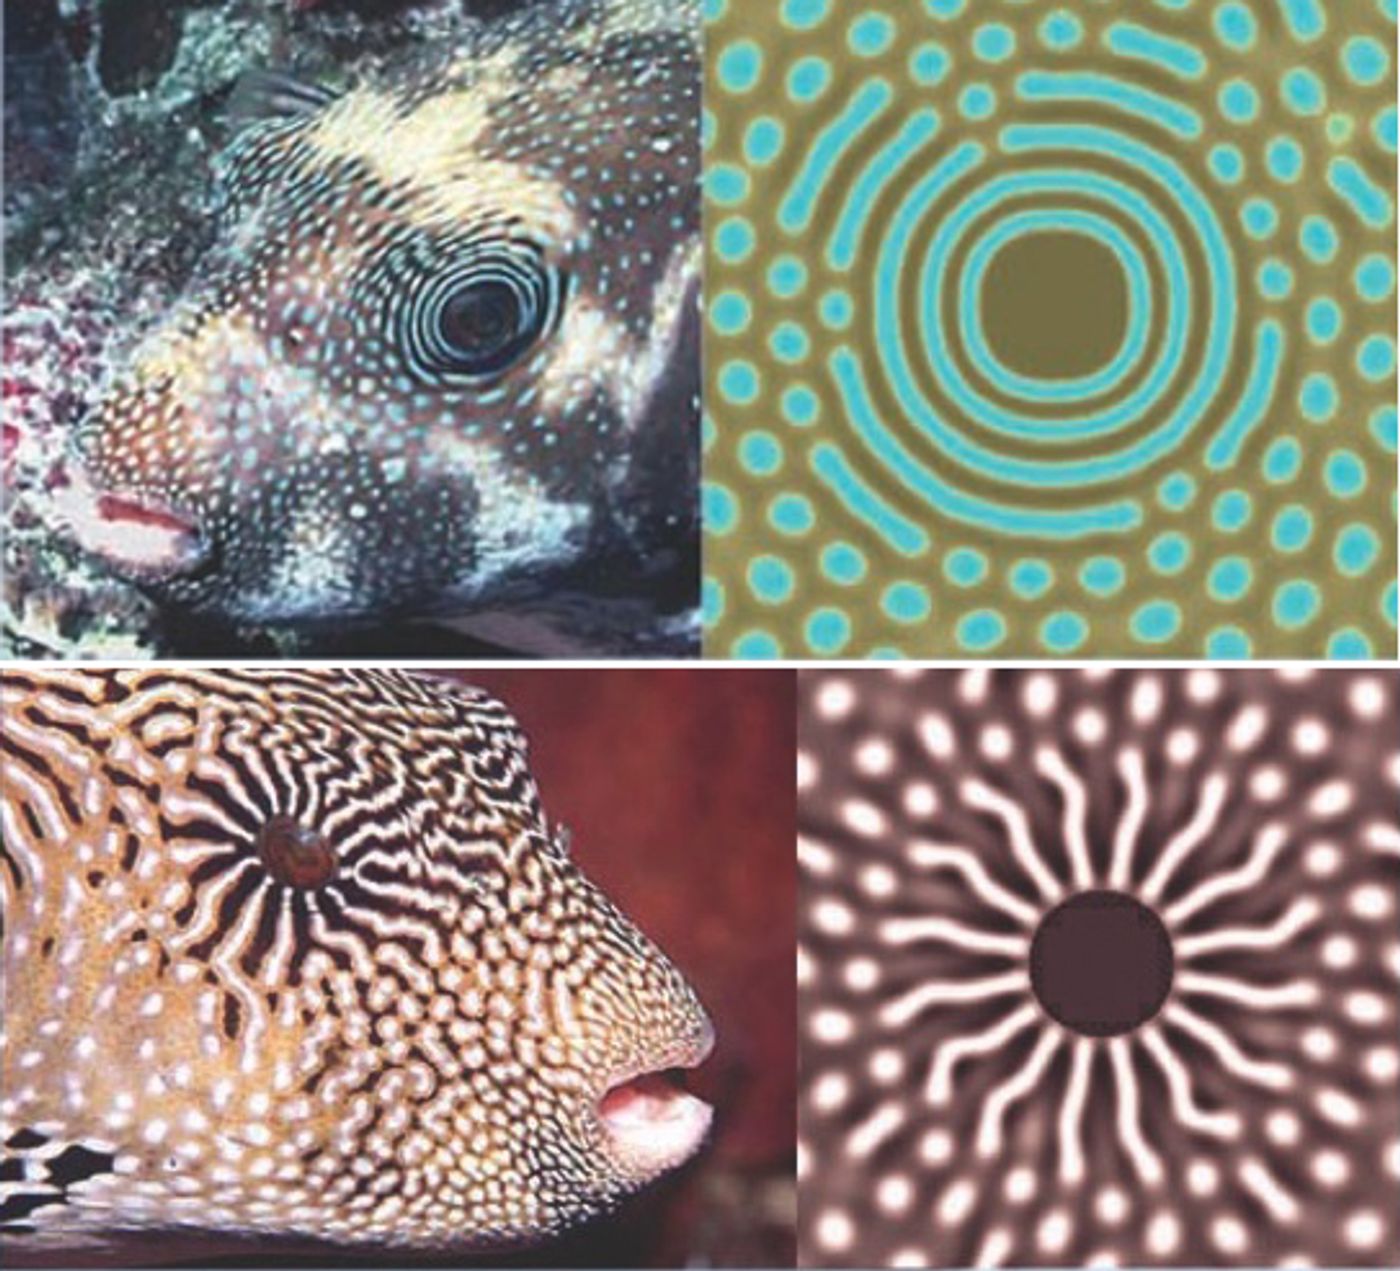 Turing Patterns in Fish. Left: real fish scale pattern; right: computer simulation. (Science)